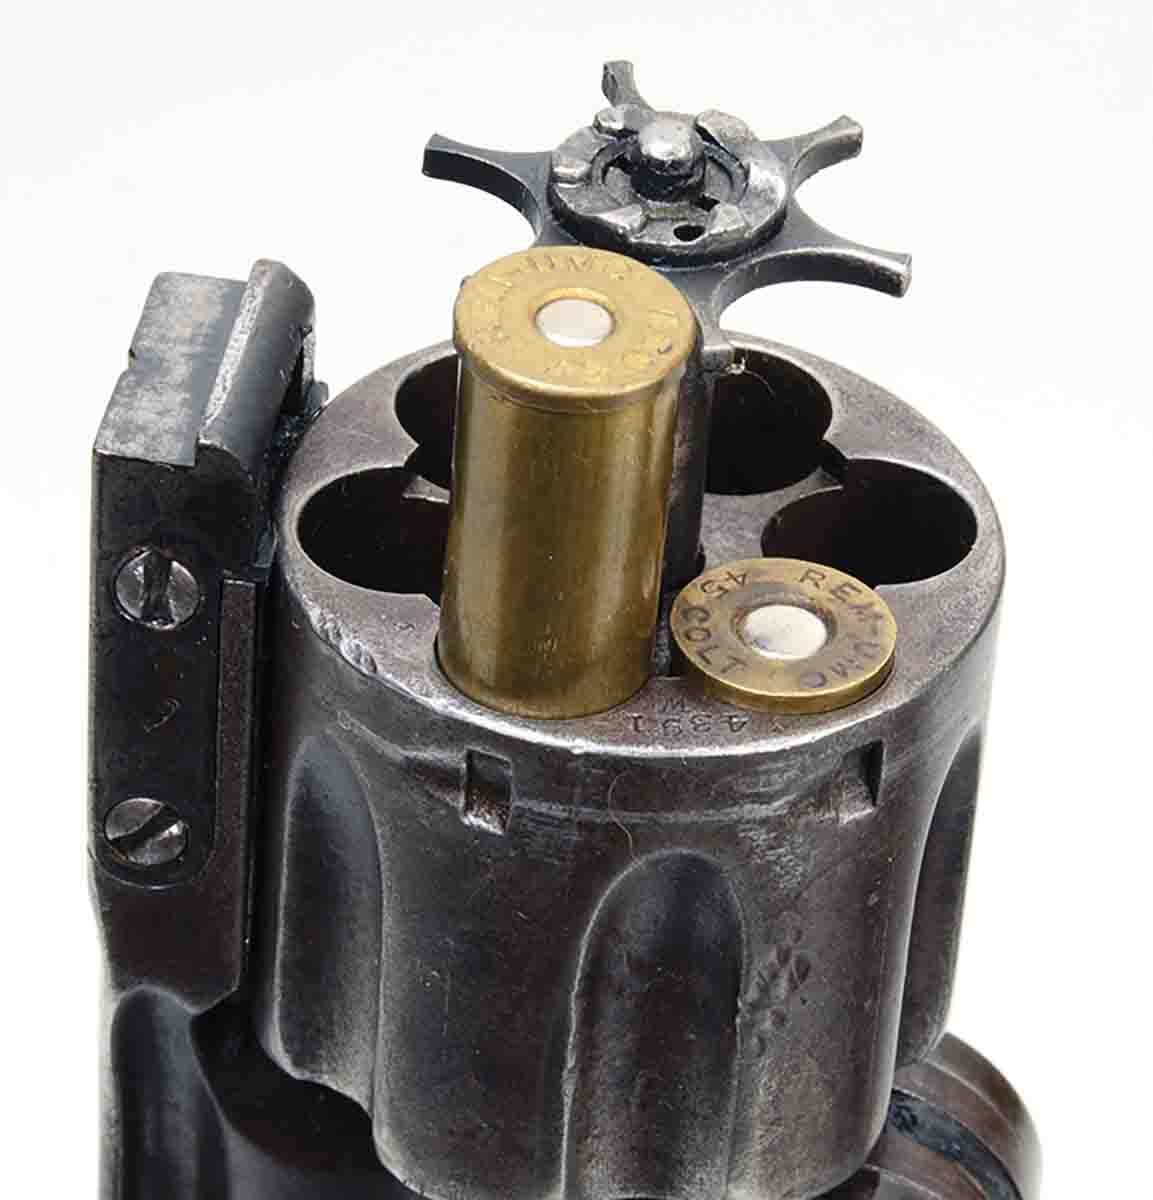 The tiny rims of 1800’s vintage .45 Colt cartridges would not function properly in .45 S&W No. 3 “Schofield” revolvers. Their tiny rims would fall under the revolver’s star extractor.